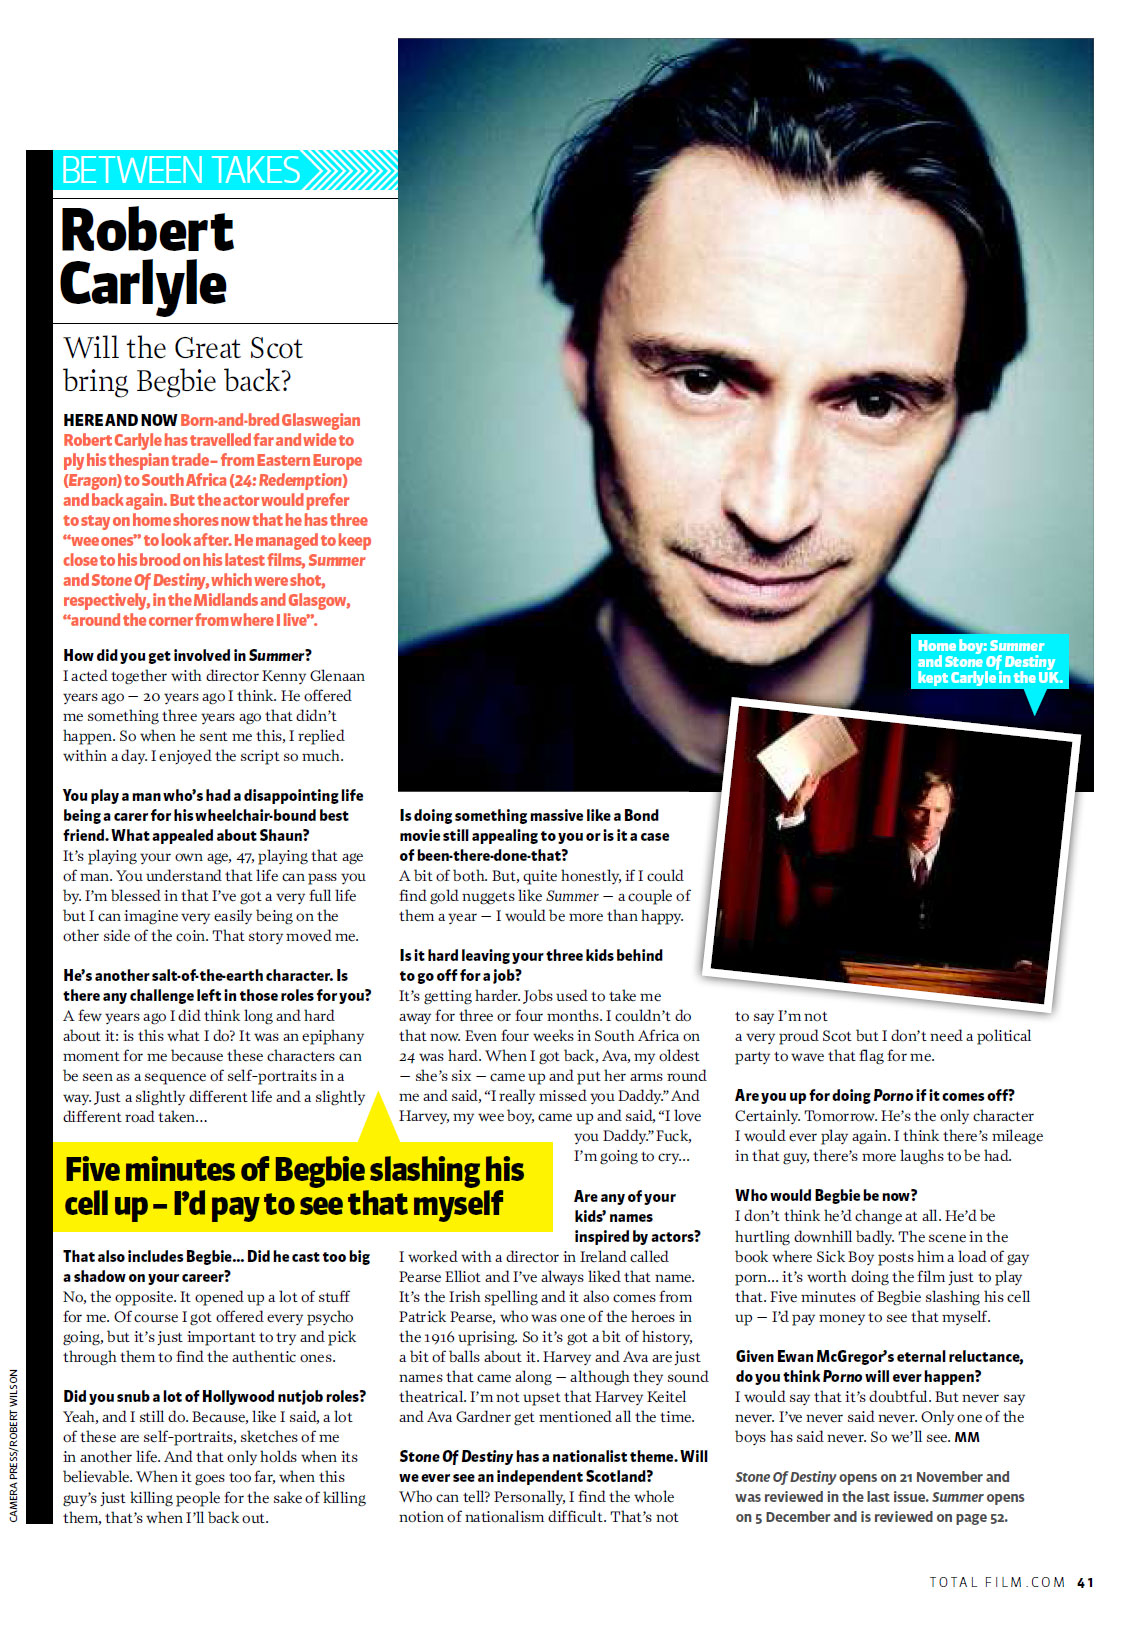 Robert Carlyle - Picture Colection